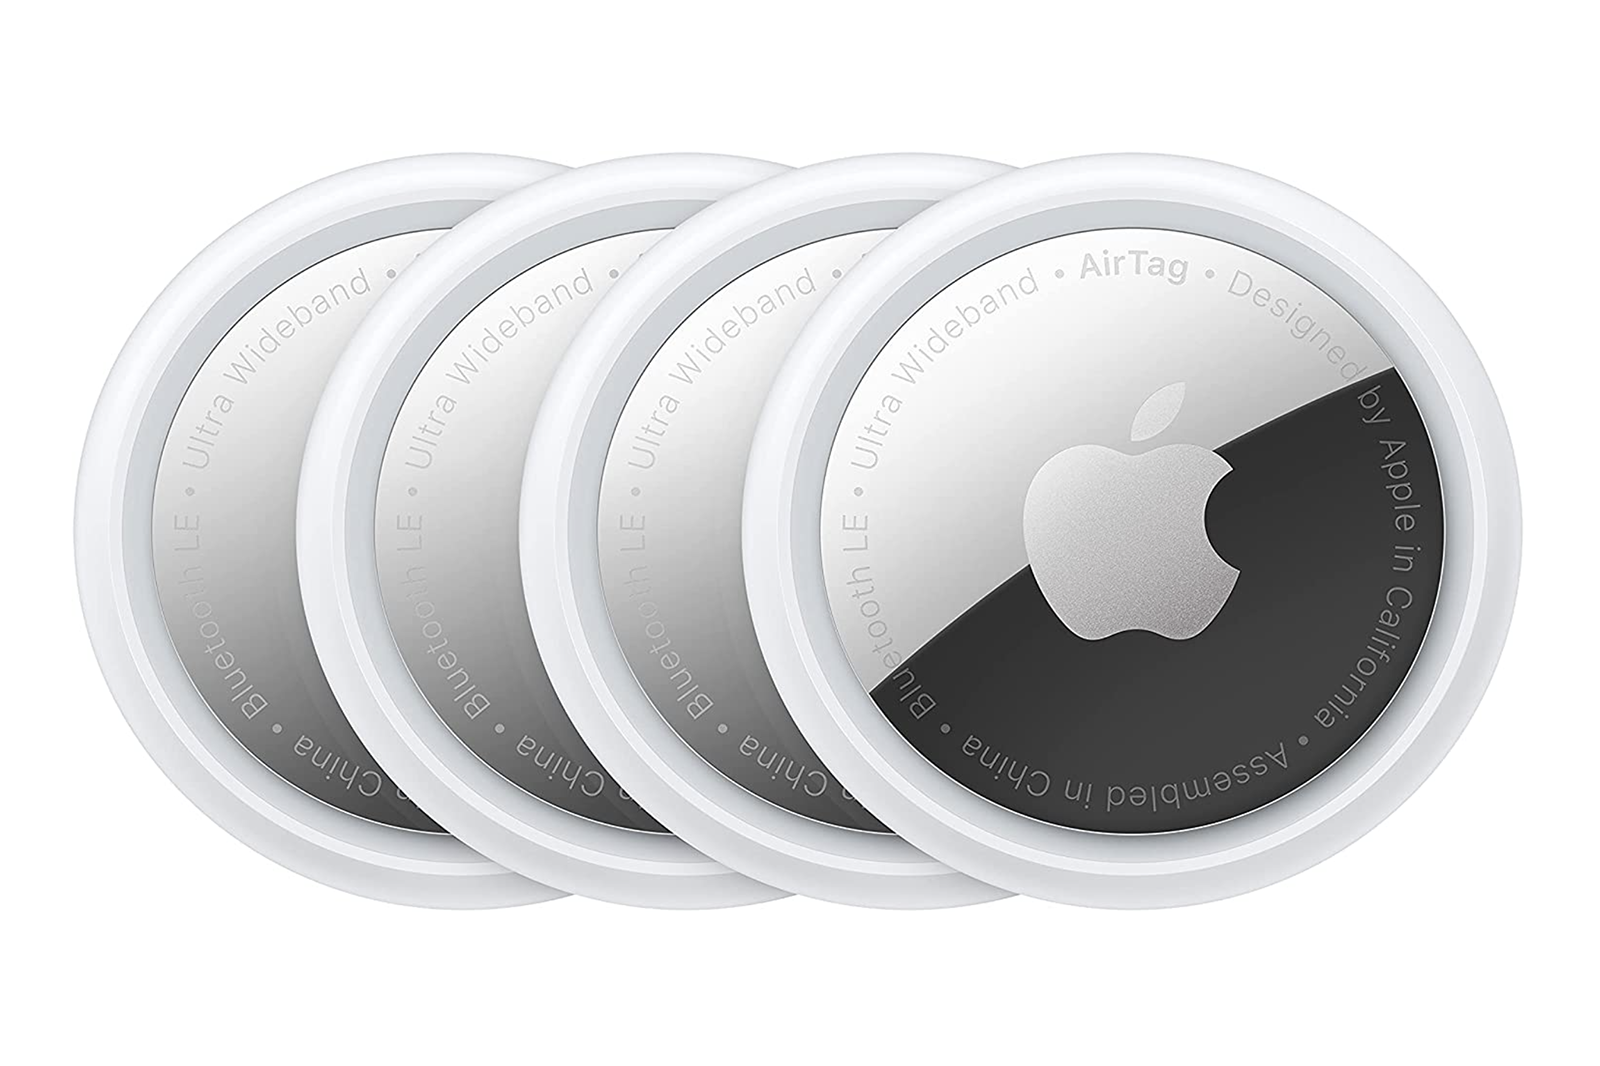 Apple AirTag 4-pack on sale for the lowest price we've seen all year — but act fast